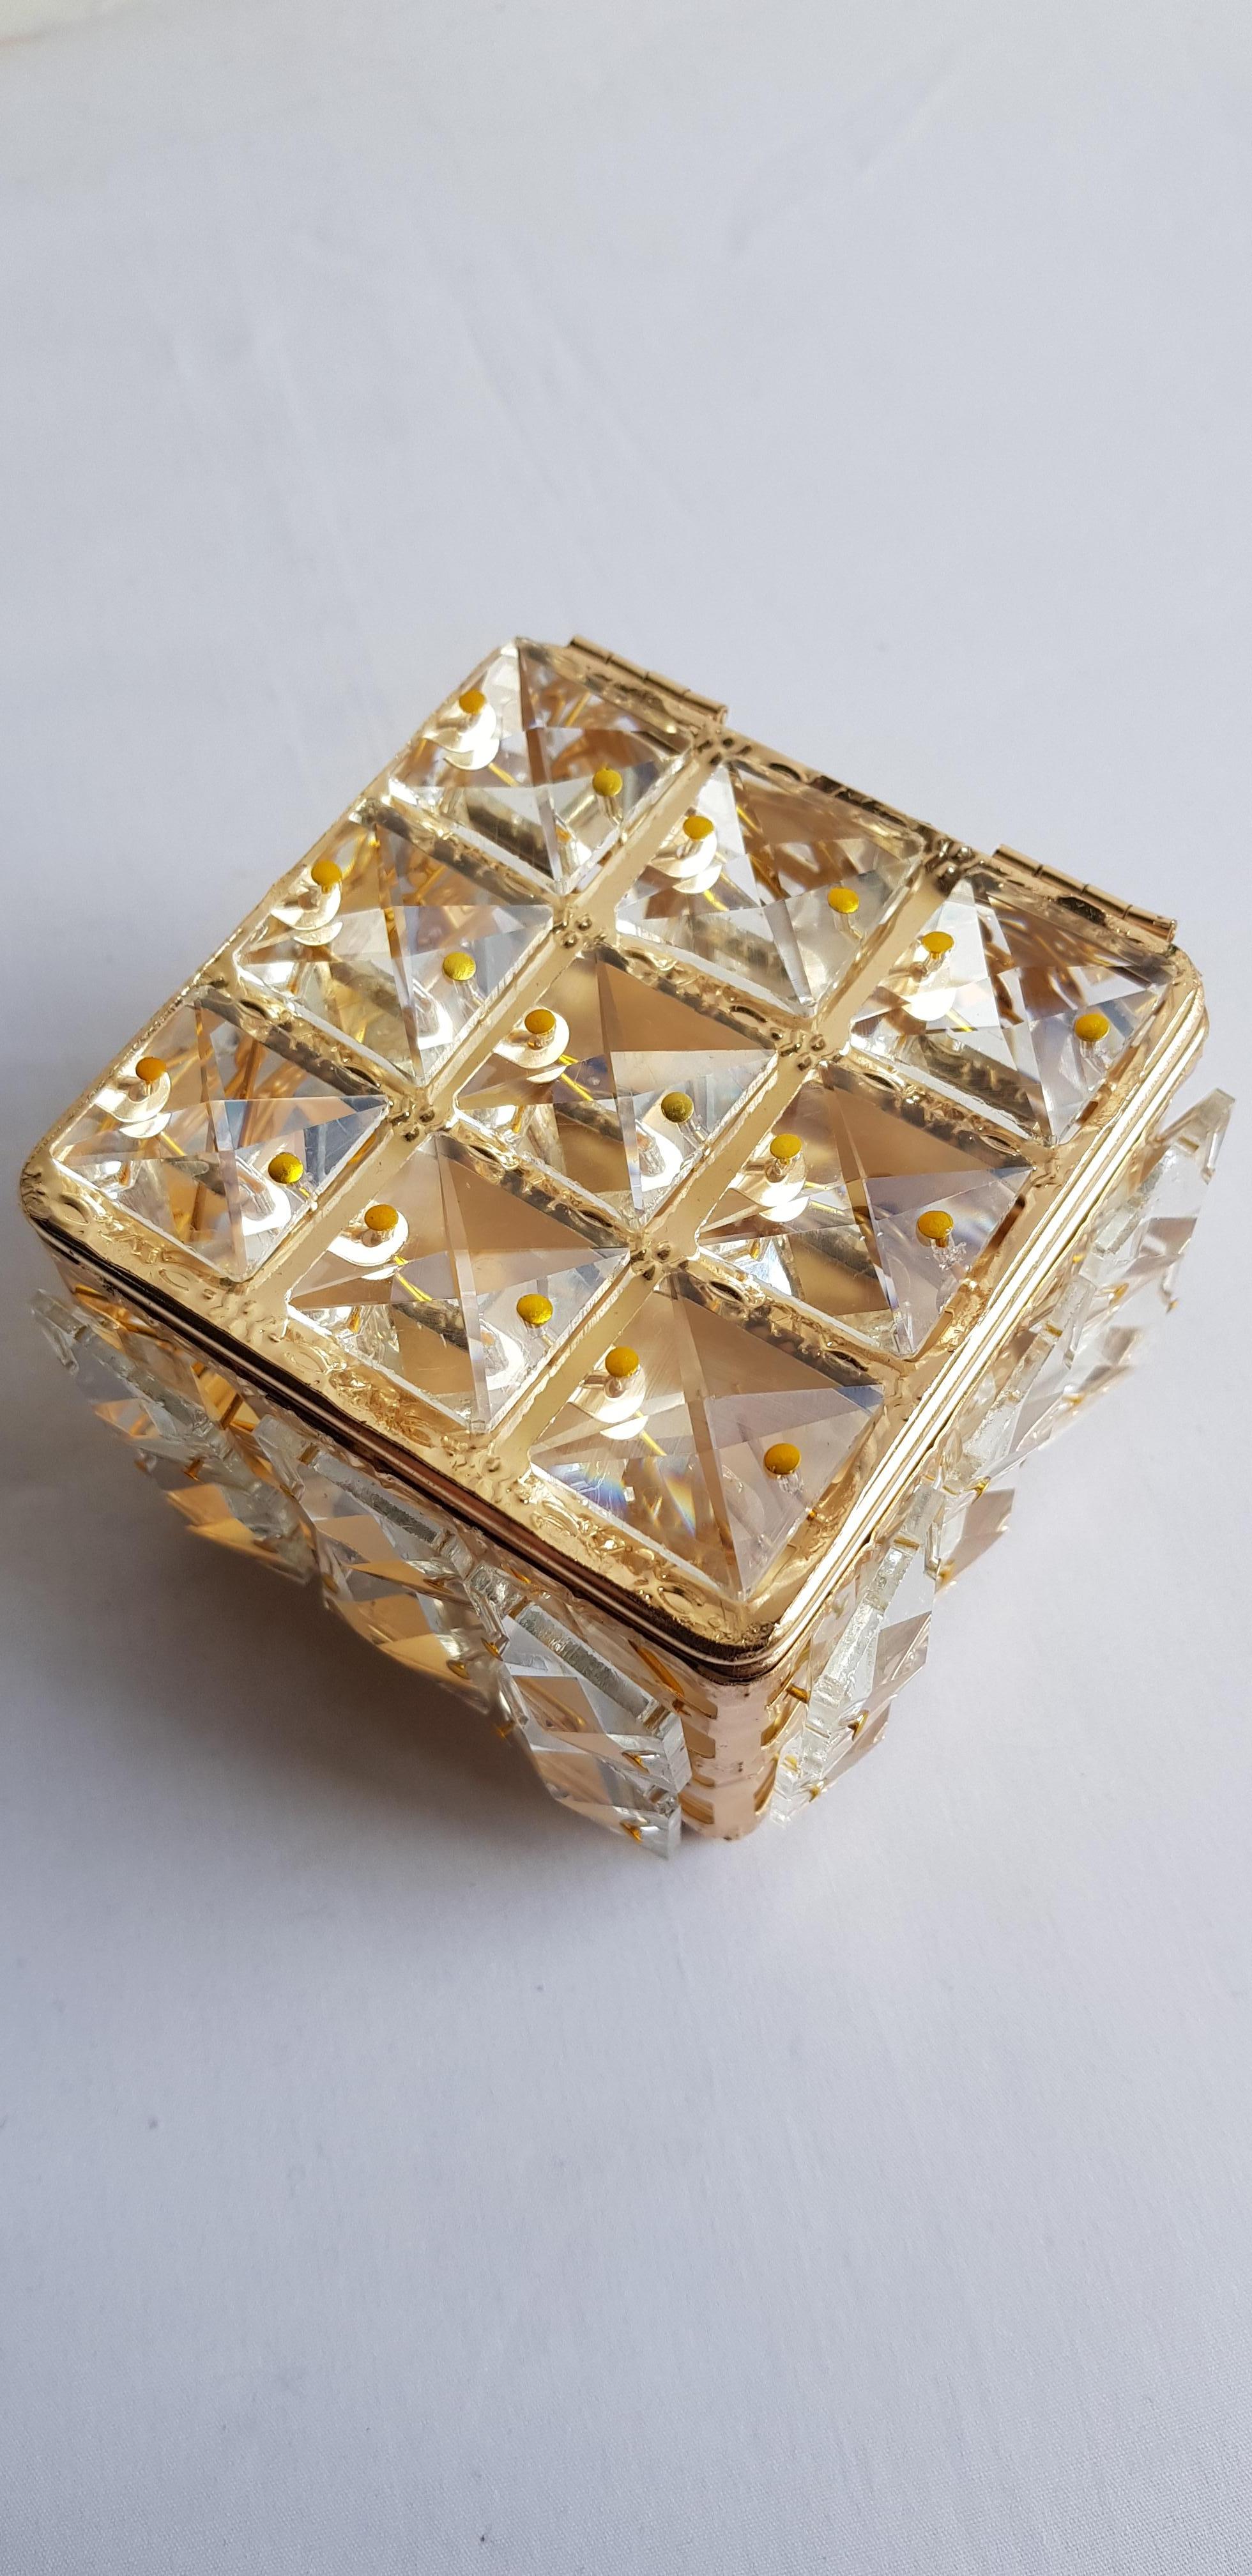 Swarowski Crystal and 24 Kt Gold Plated Jewellery Box and Candle Holder For Sale 4